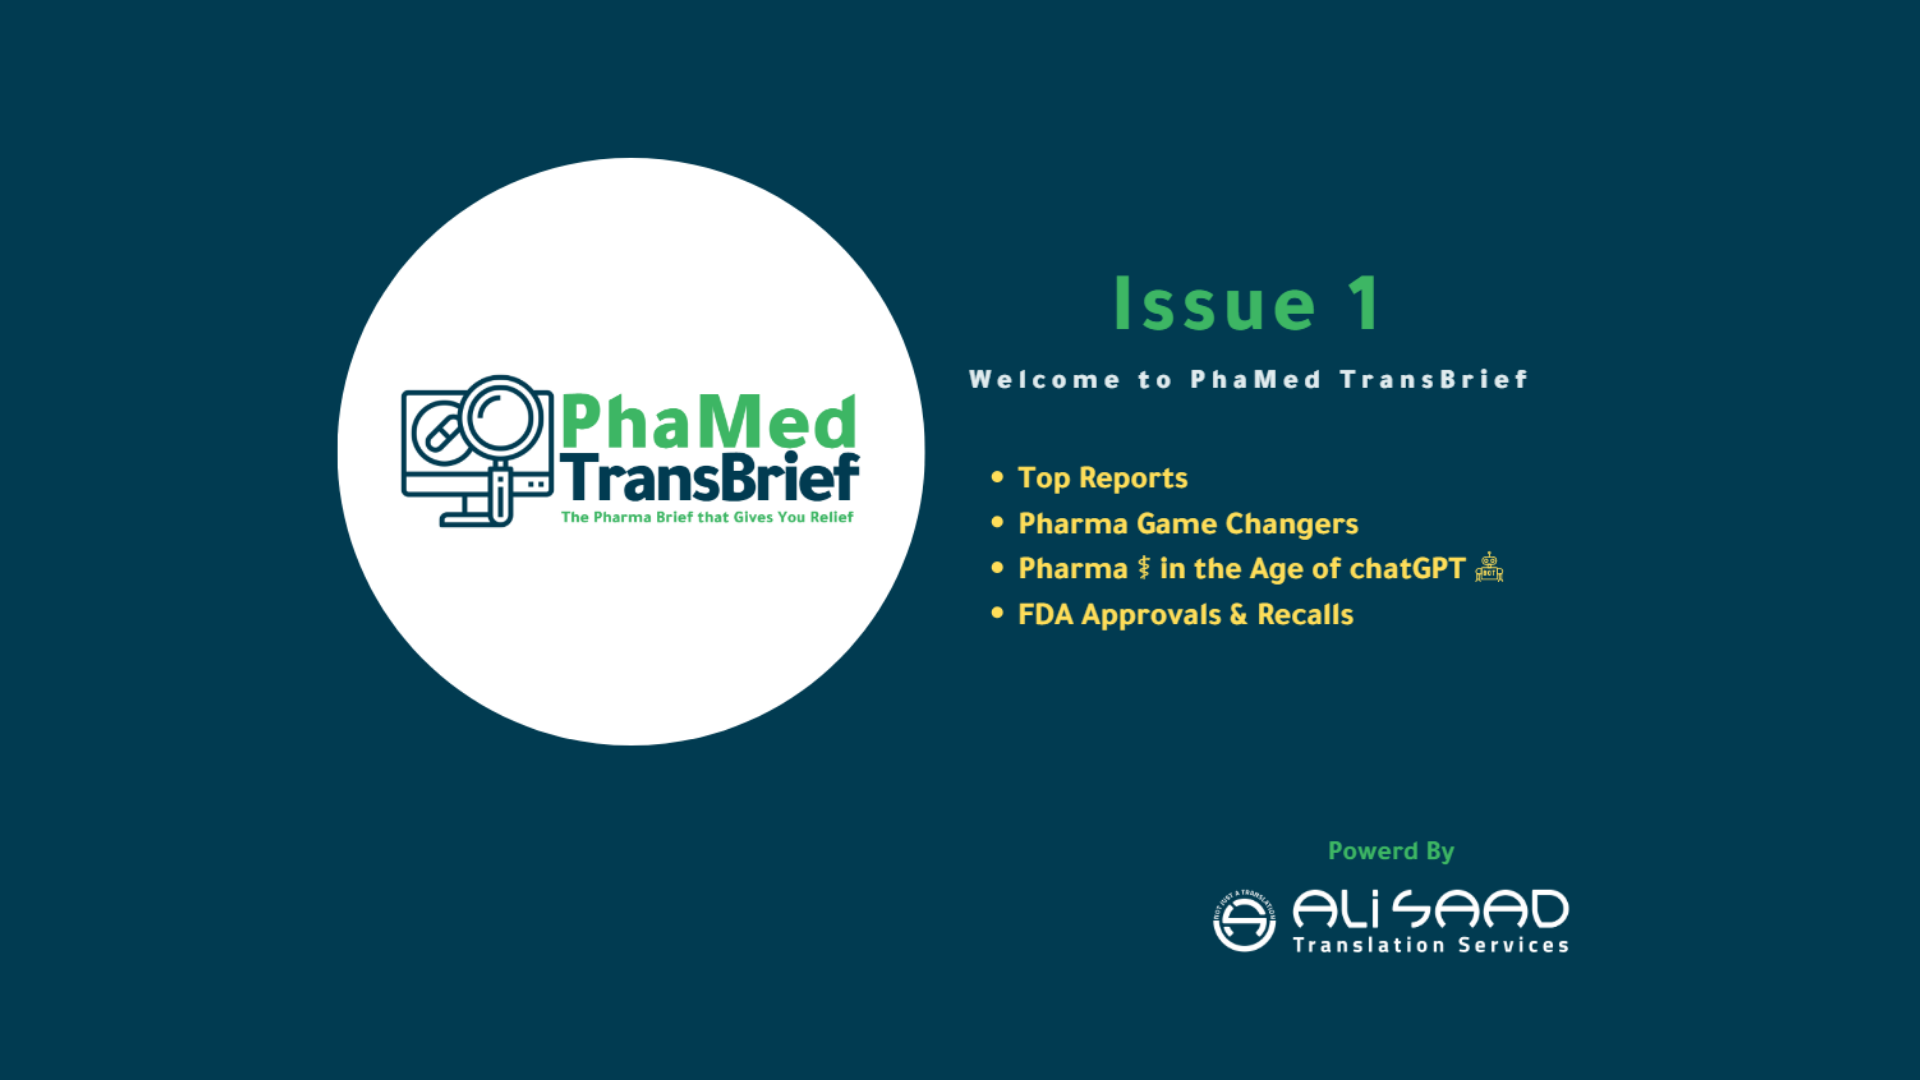 Featured Image of PhaMed TransBrief Newsletter Issue 1 by Ali Saad Translation Services